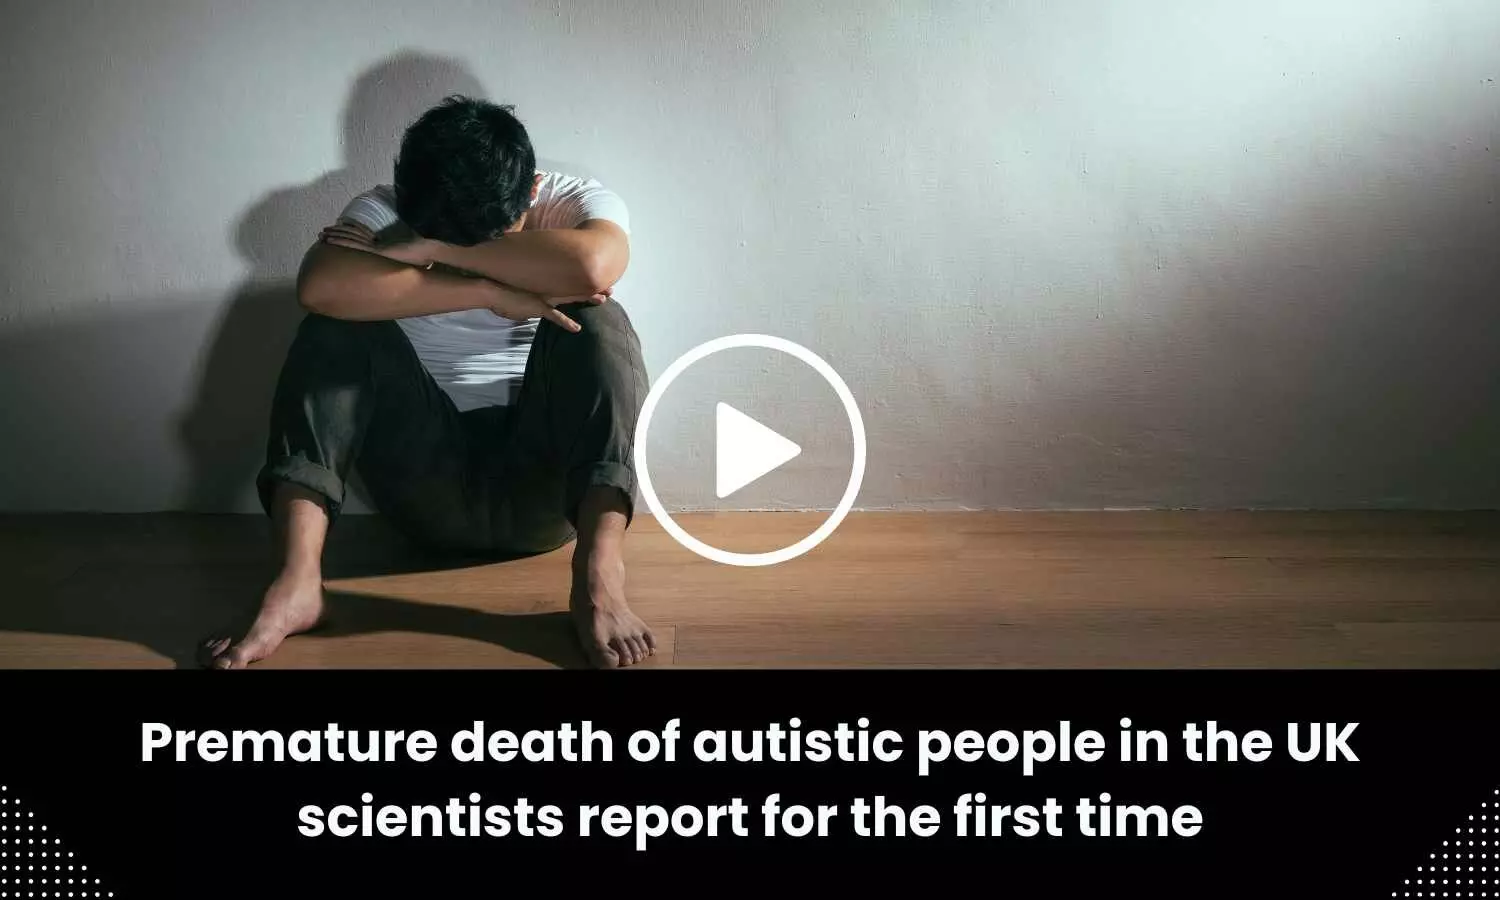 Premature death of autistic people in the UK scientists report for the first time